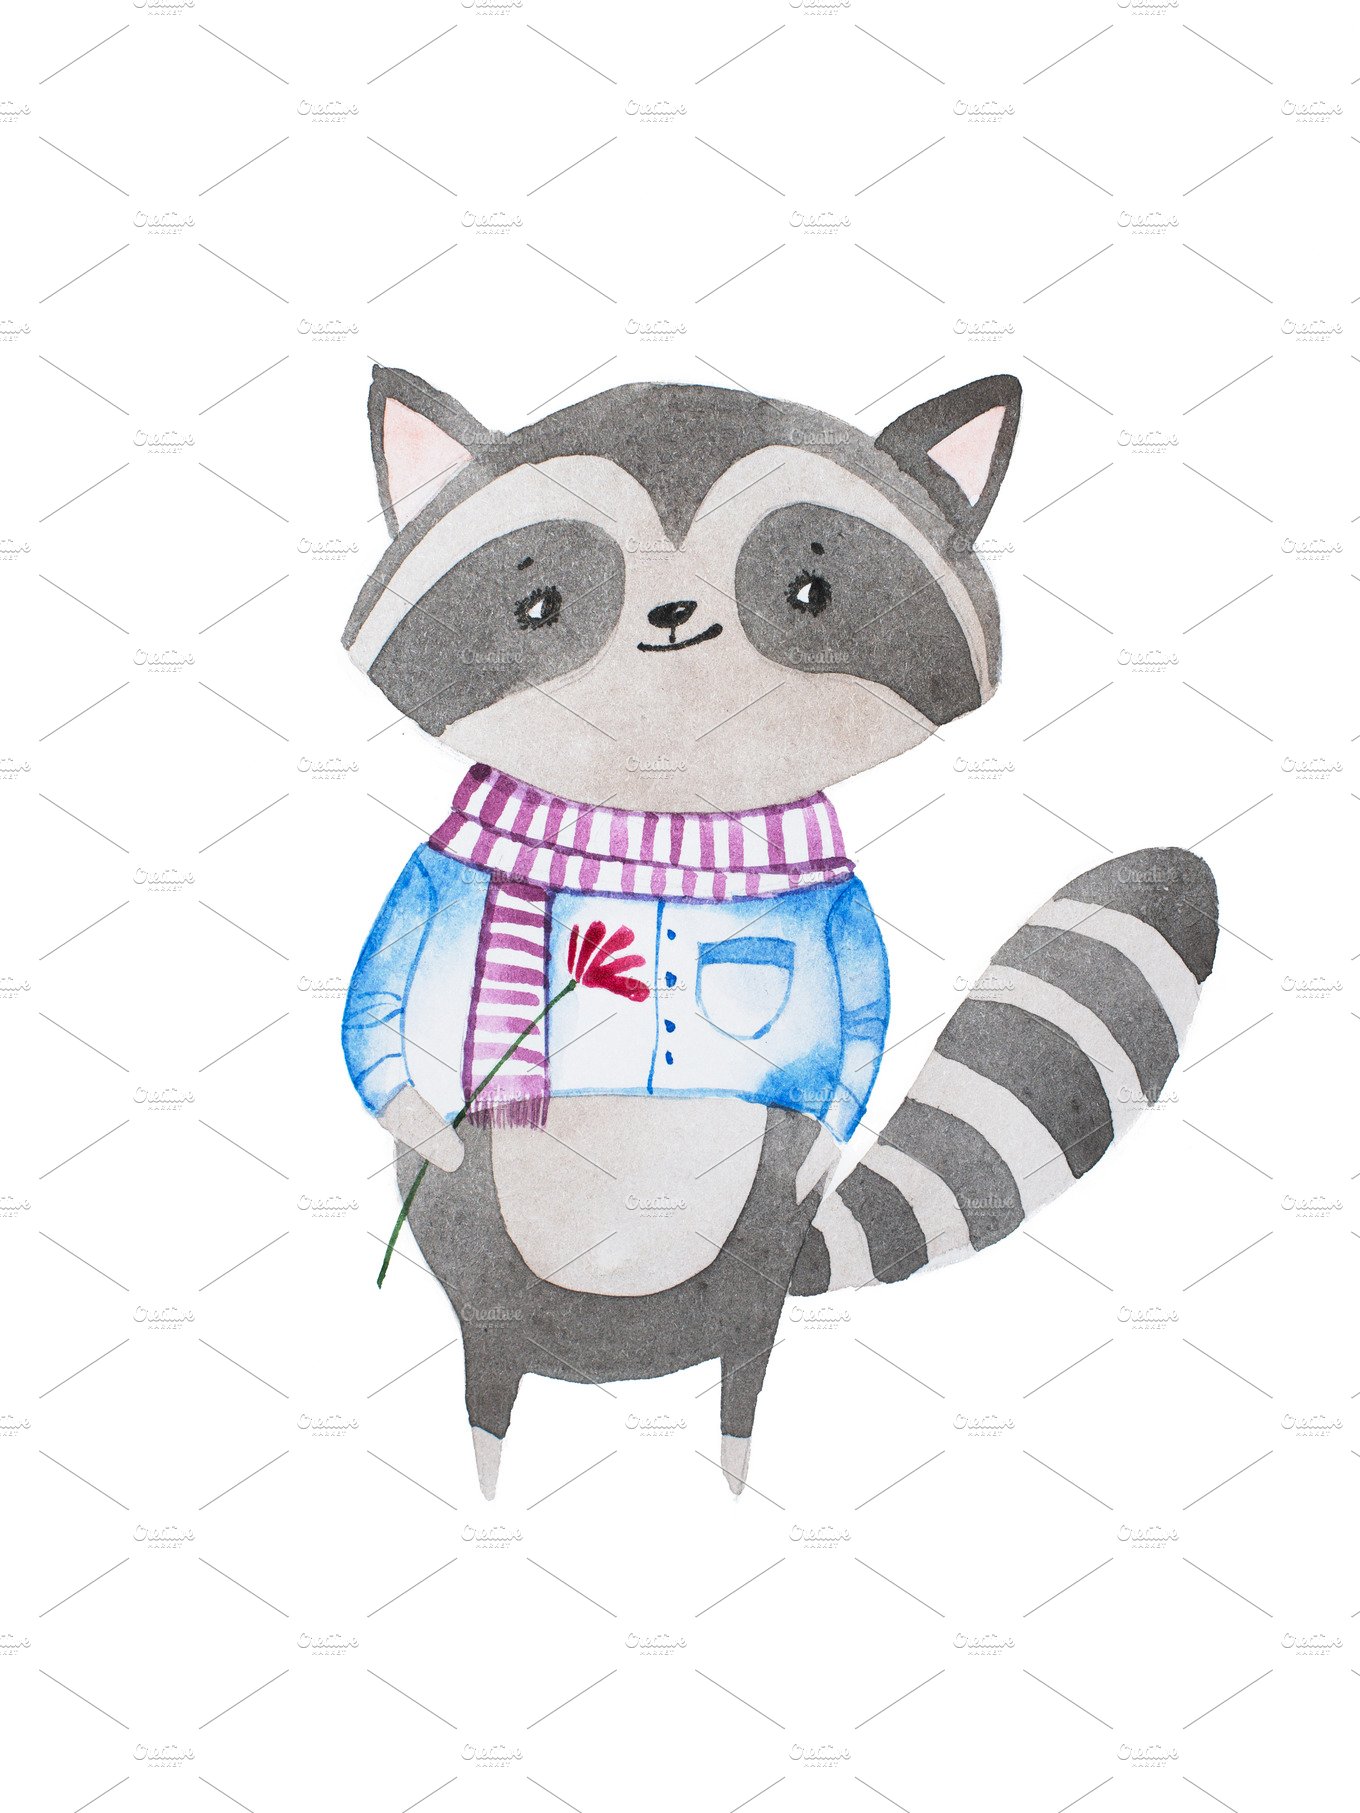 Hand drawn cartoon character. Shy cute little baby raccoon wearing scarf an... cover image.